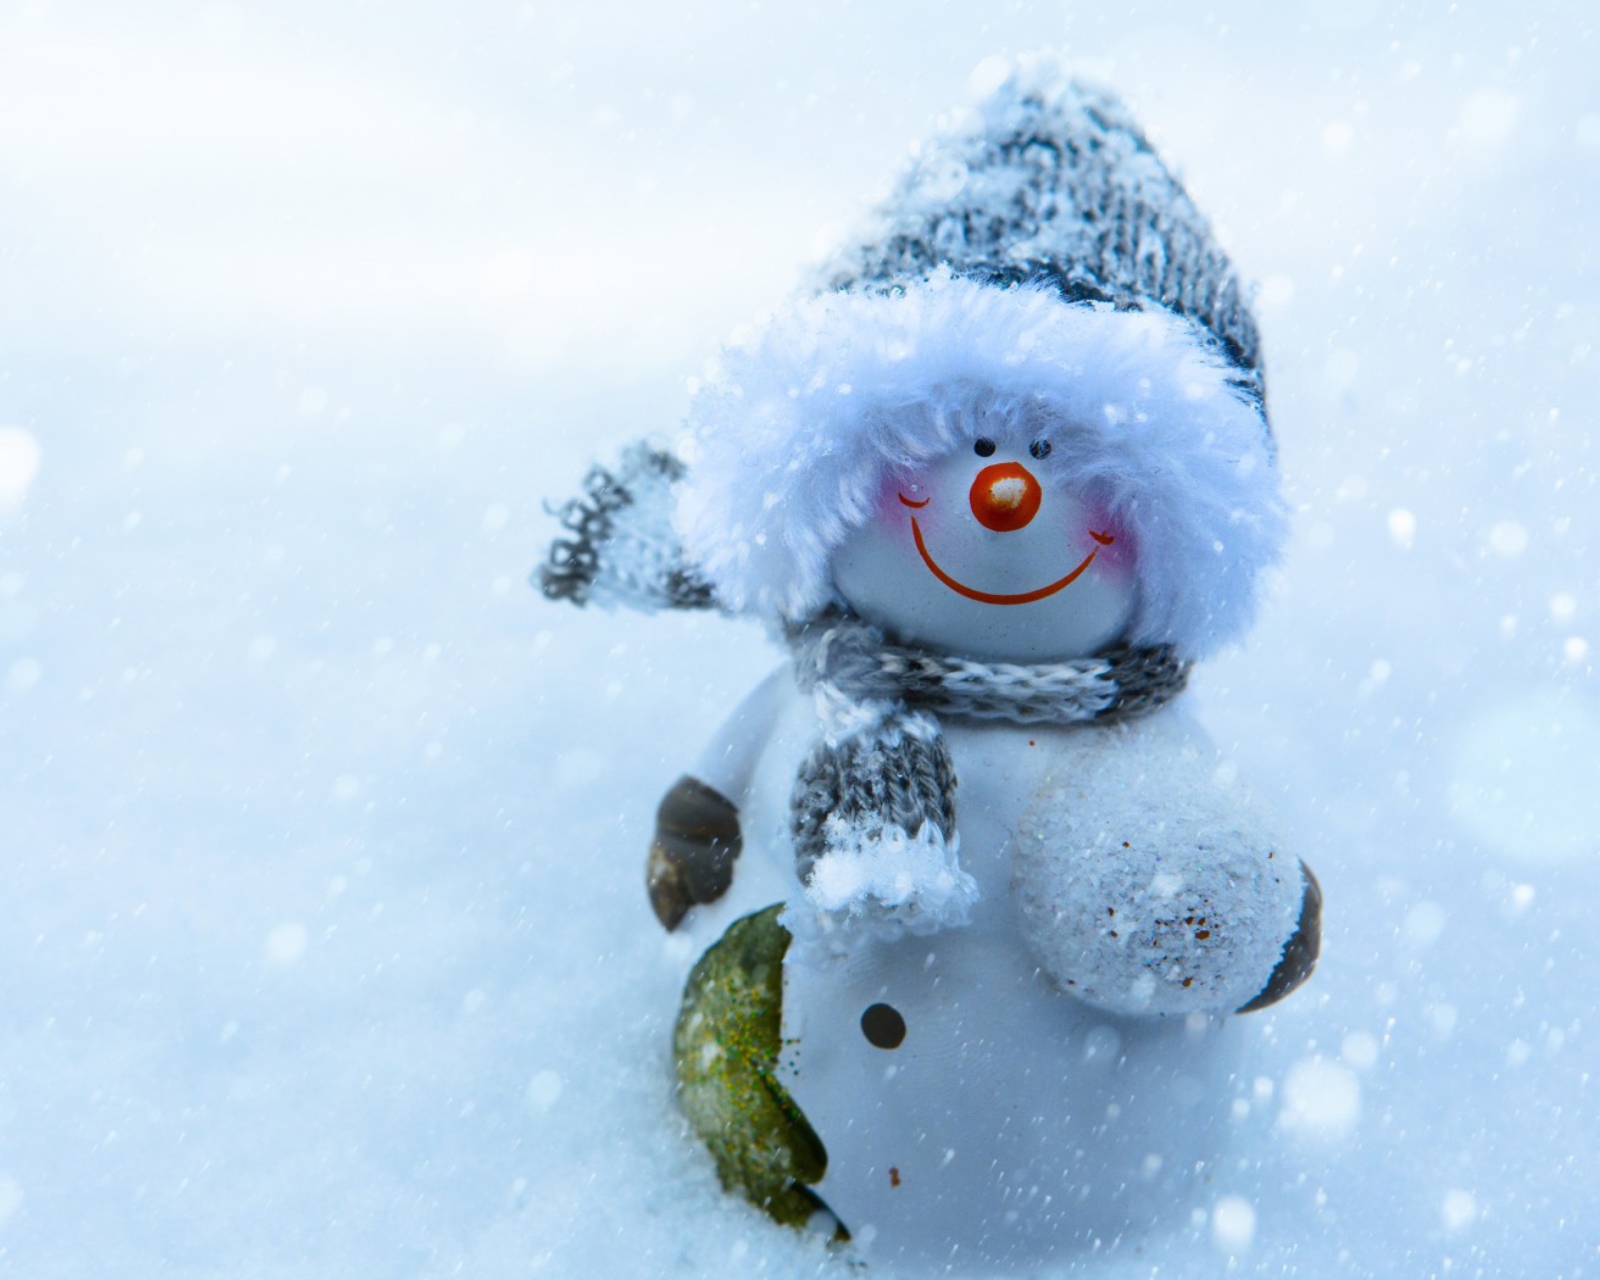 Snowman Covered With Snowflakes wallpaper 1600x1280